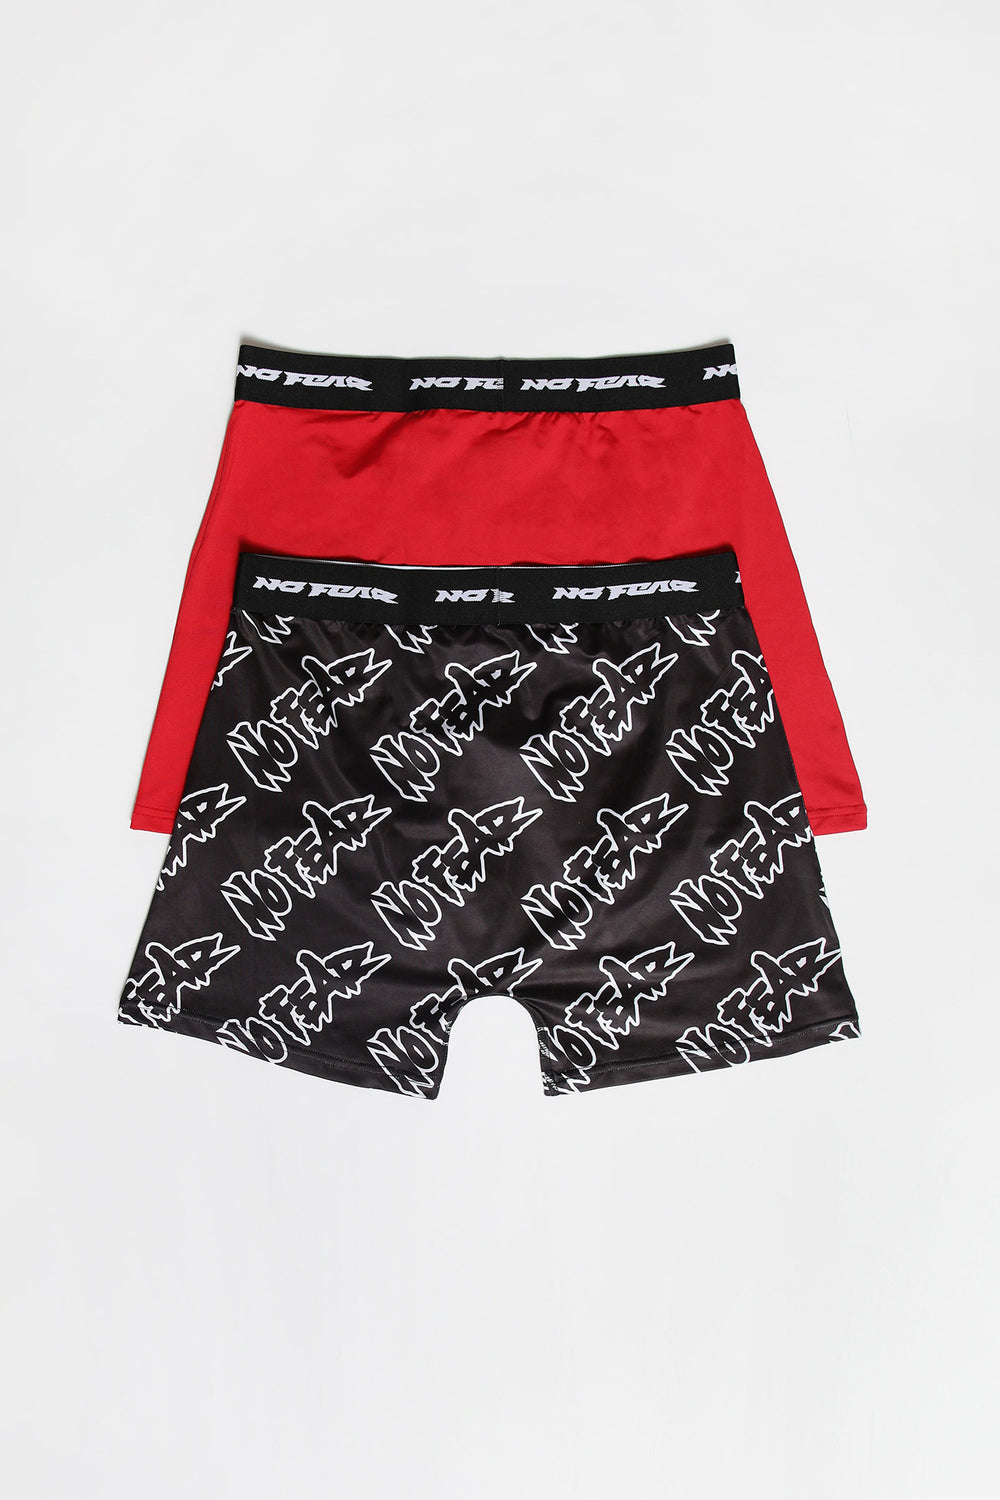 No Fear Youth 2-Pack Boxer Briefs Red